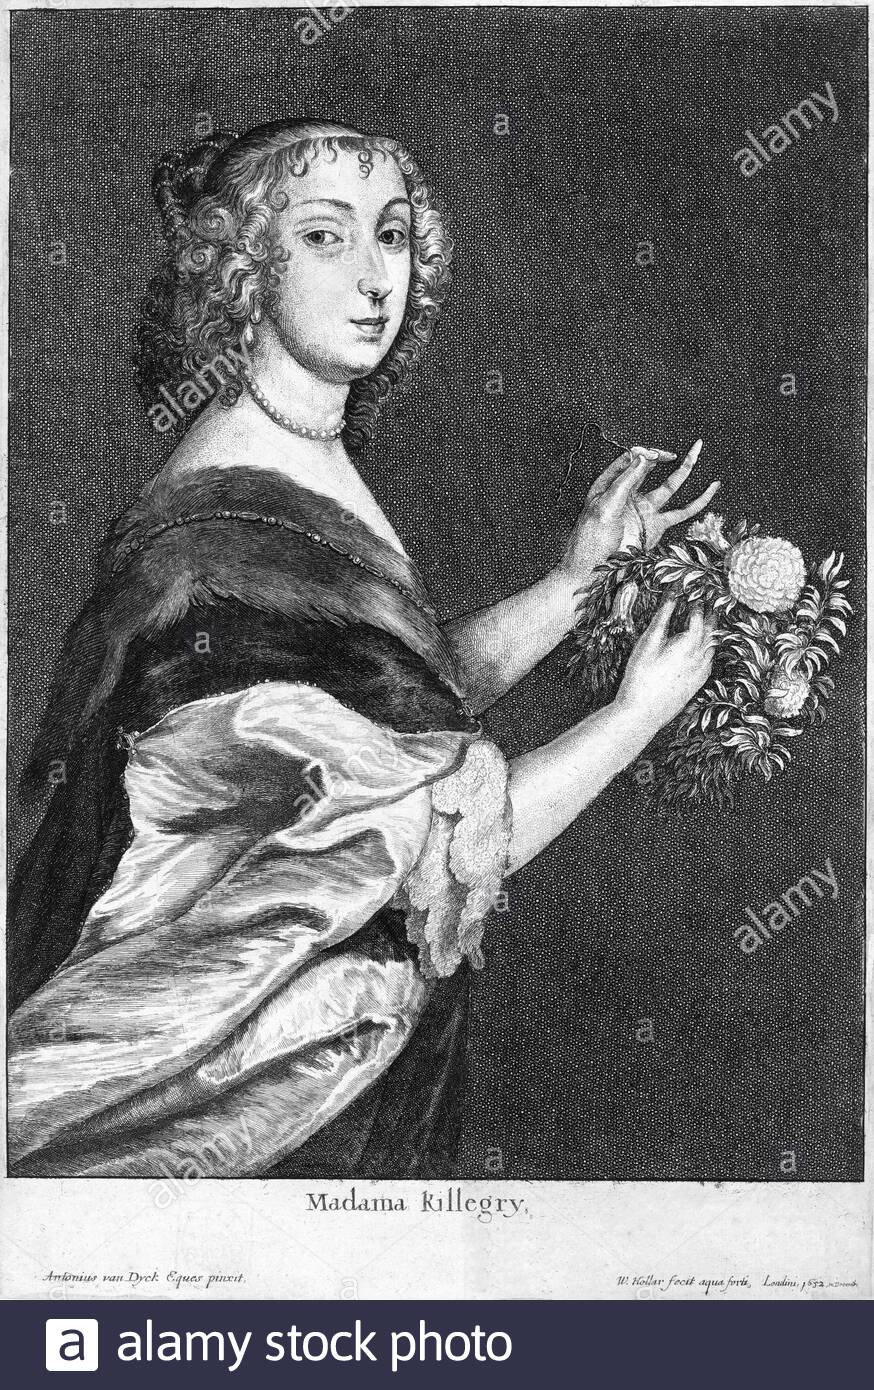 Cecilia Killigrew, d1685, courtier and maid of honour to Henrietta Maria, and subject of poems, etching by Bohemian etcher Wenceslaus Hollar from 1600s. From a portrait by Anthony van Dyck. Stock Photo